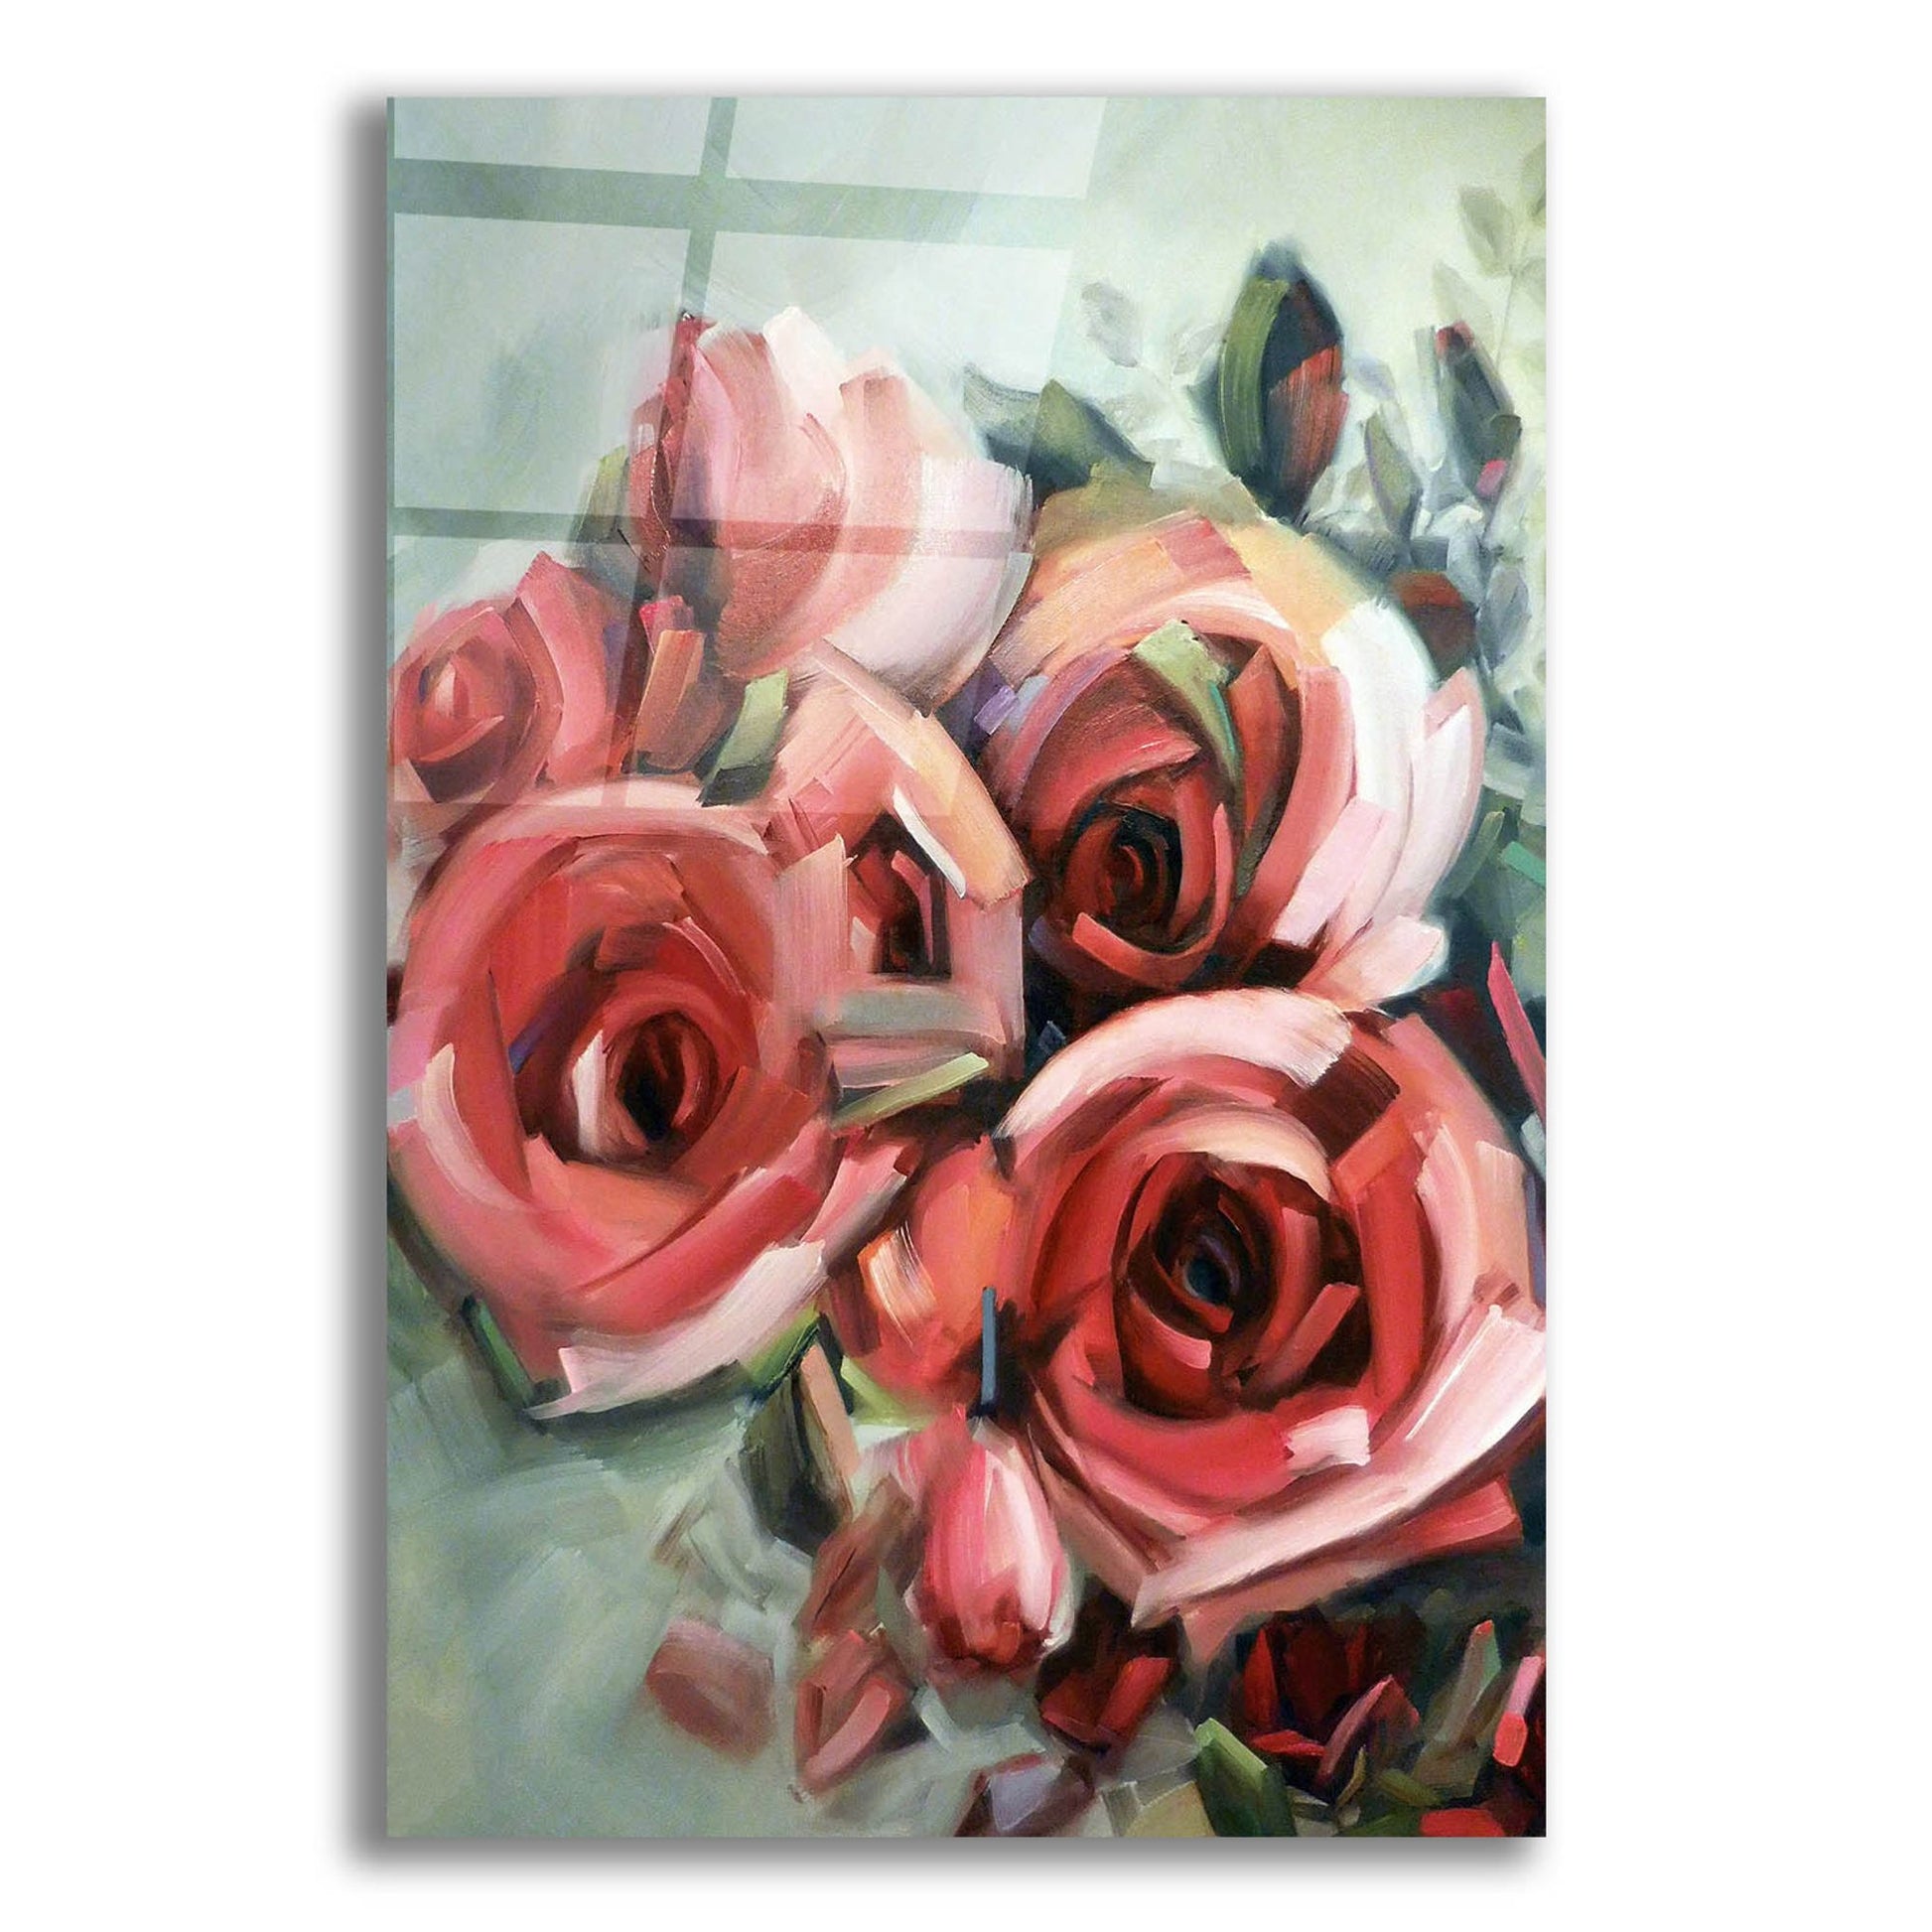 Epic Art 'Amid Scent Of Roses' by Holly Van Hart, Acrylic Glass Wall Art